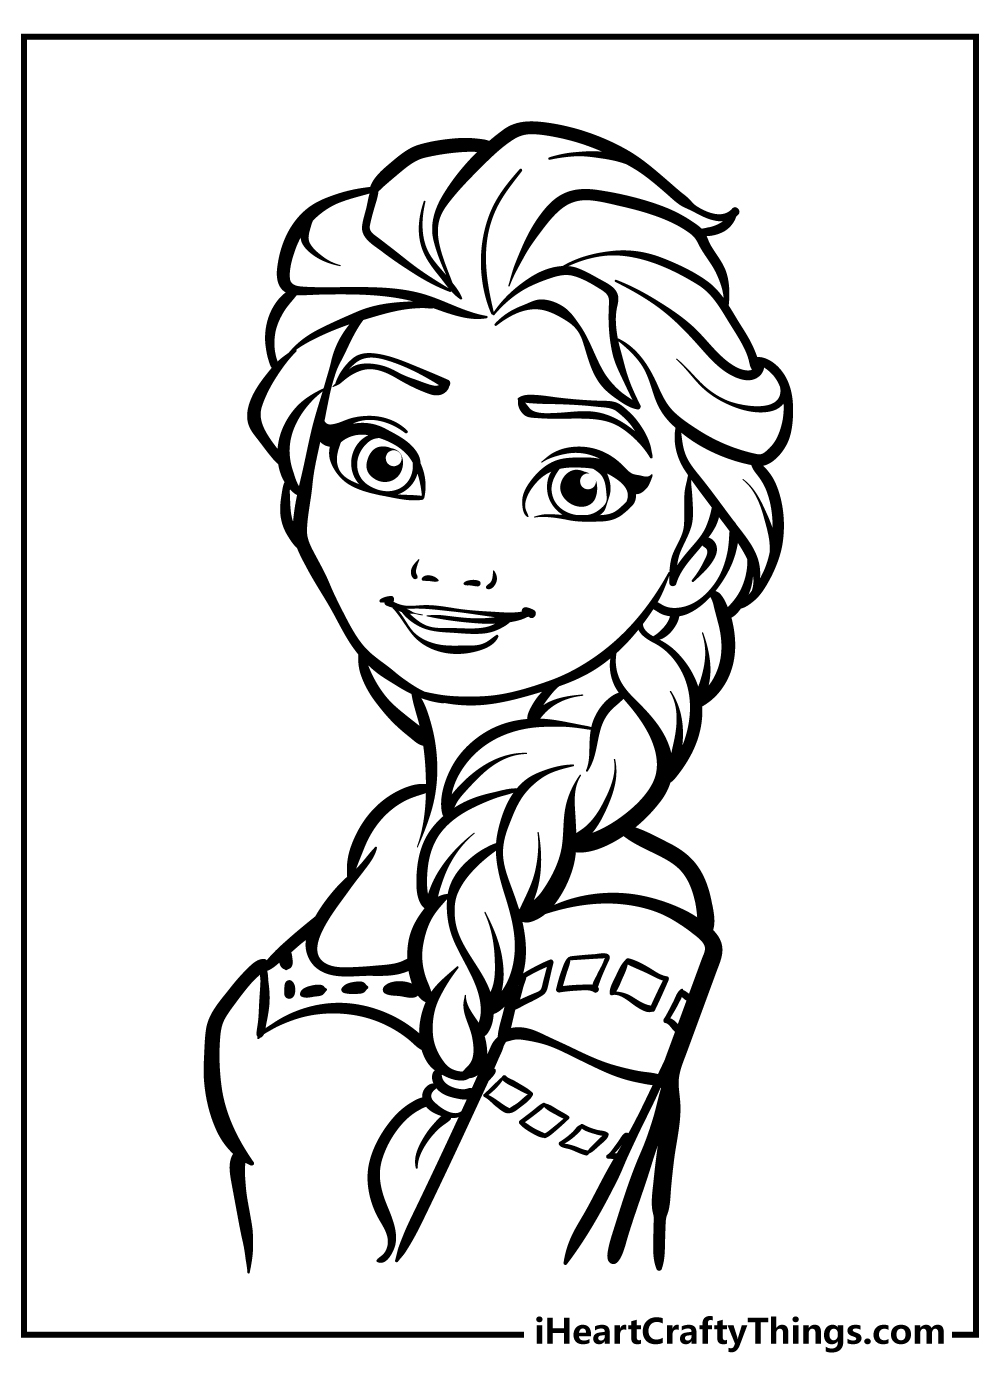 Elsa Coloring Pages for preschoolers free printable